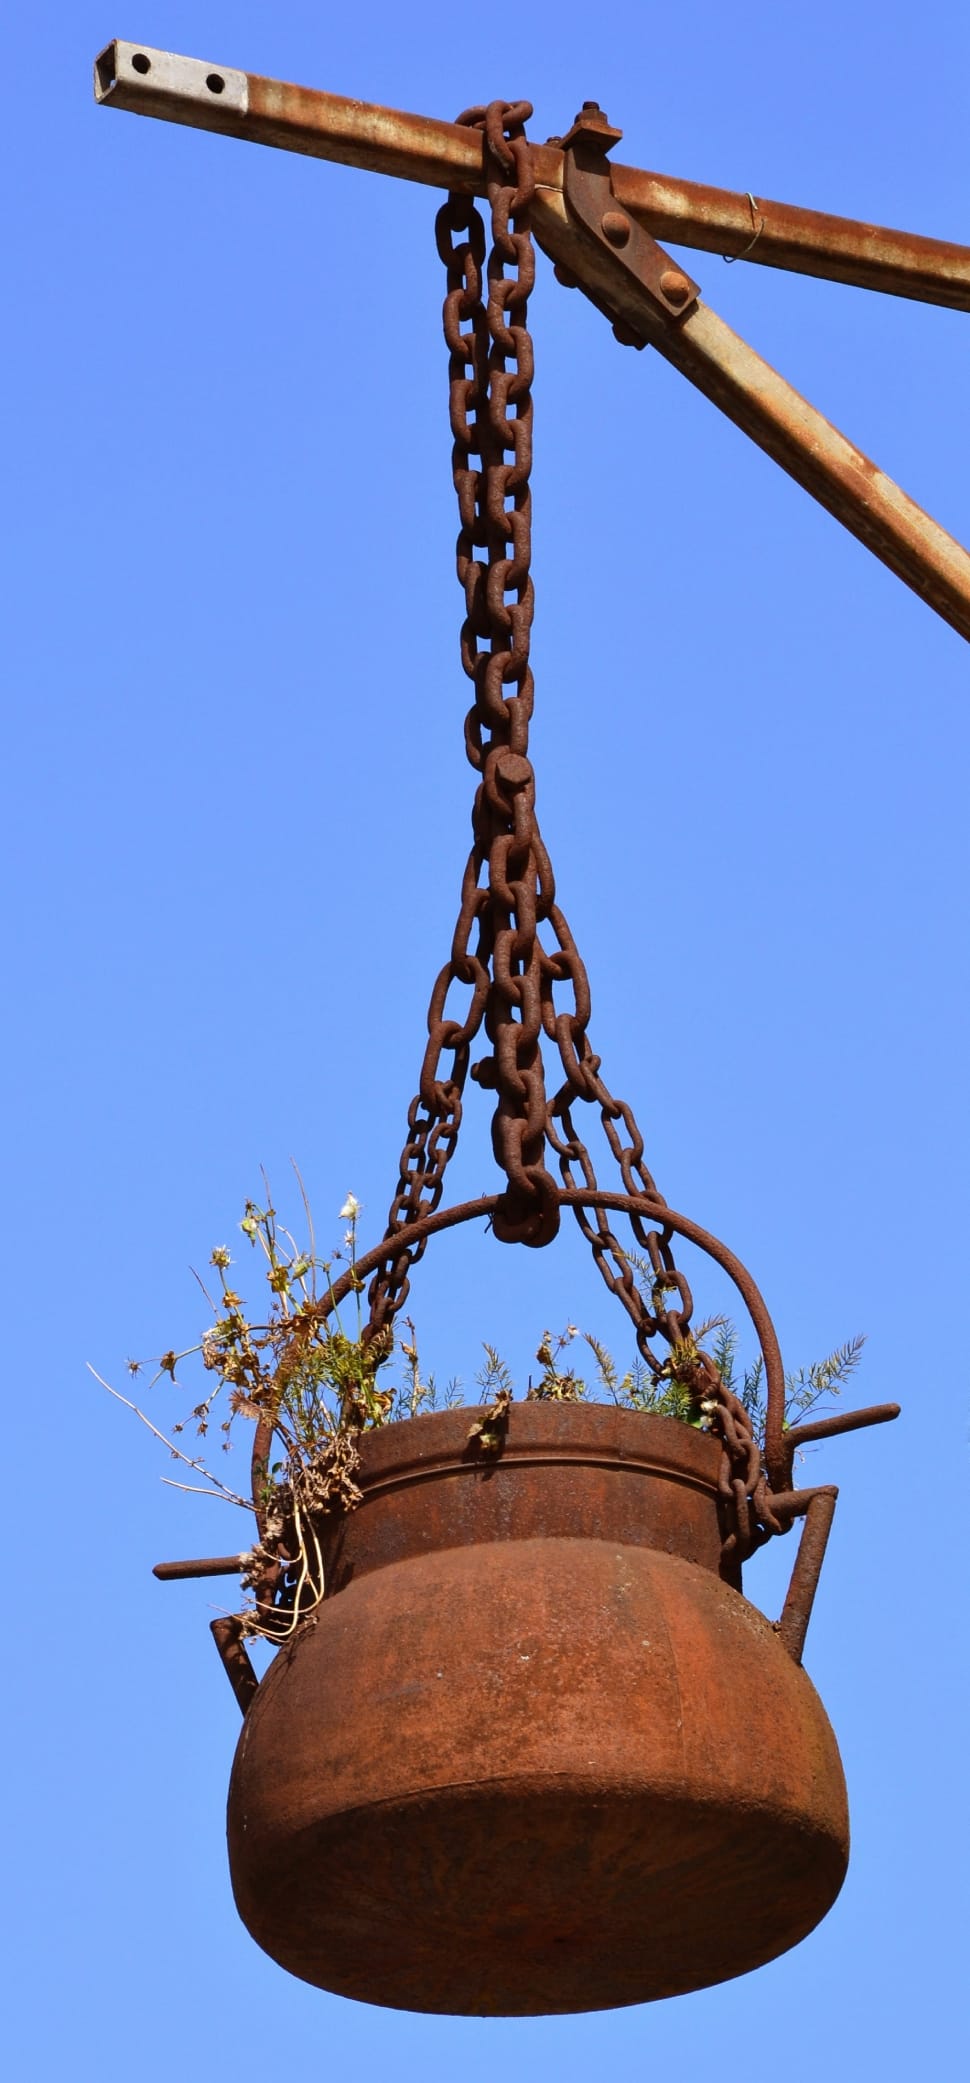 brown metal pot hanging on post with chains under blue sky during daytime preview